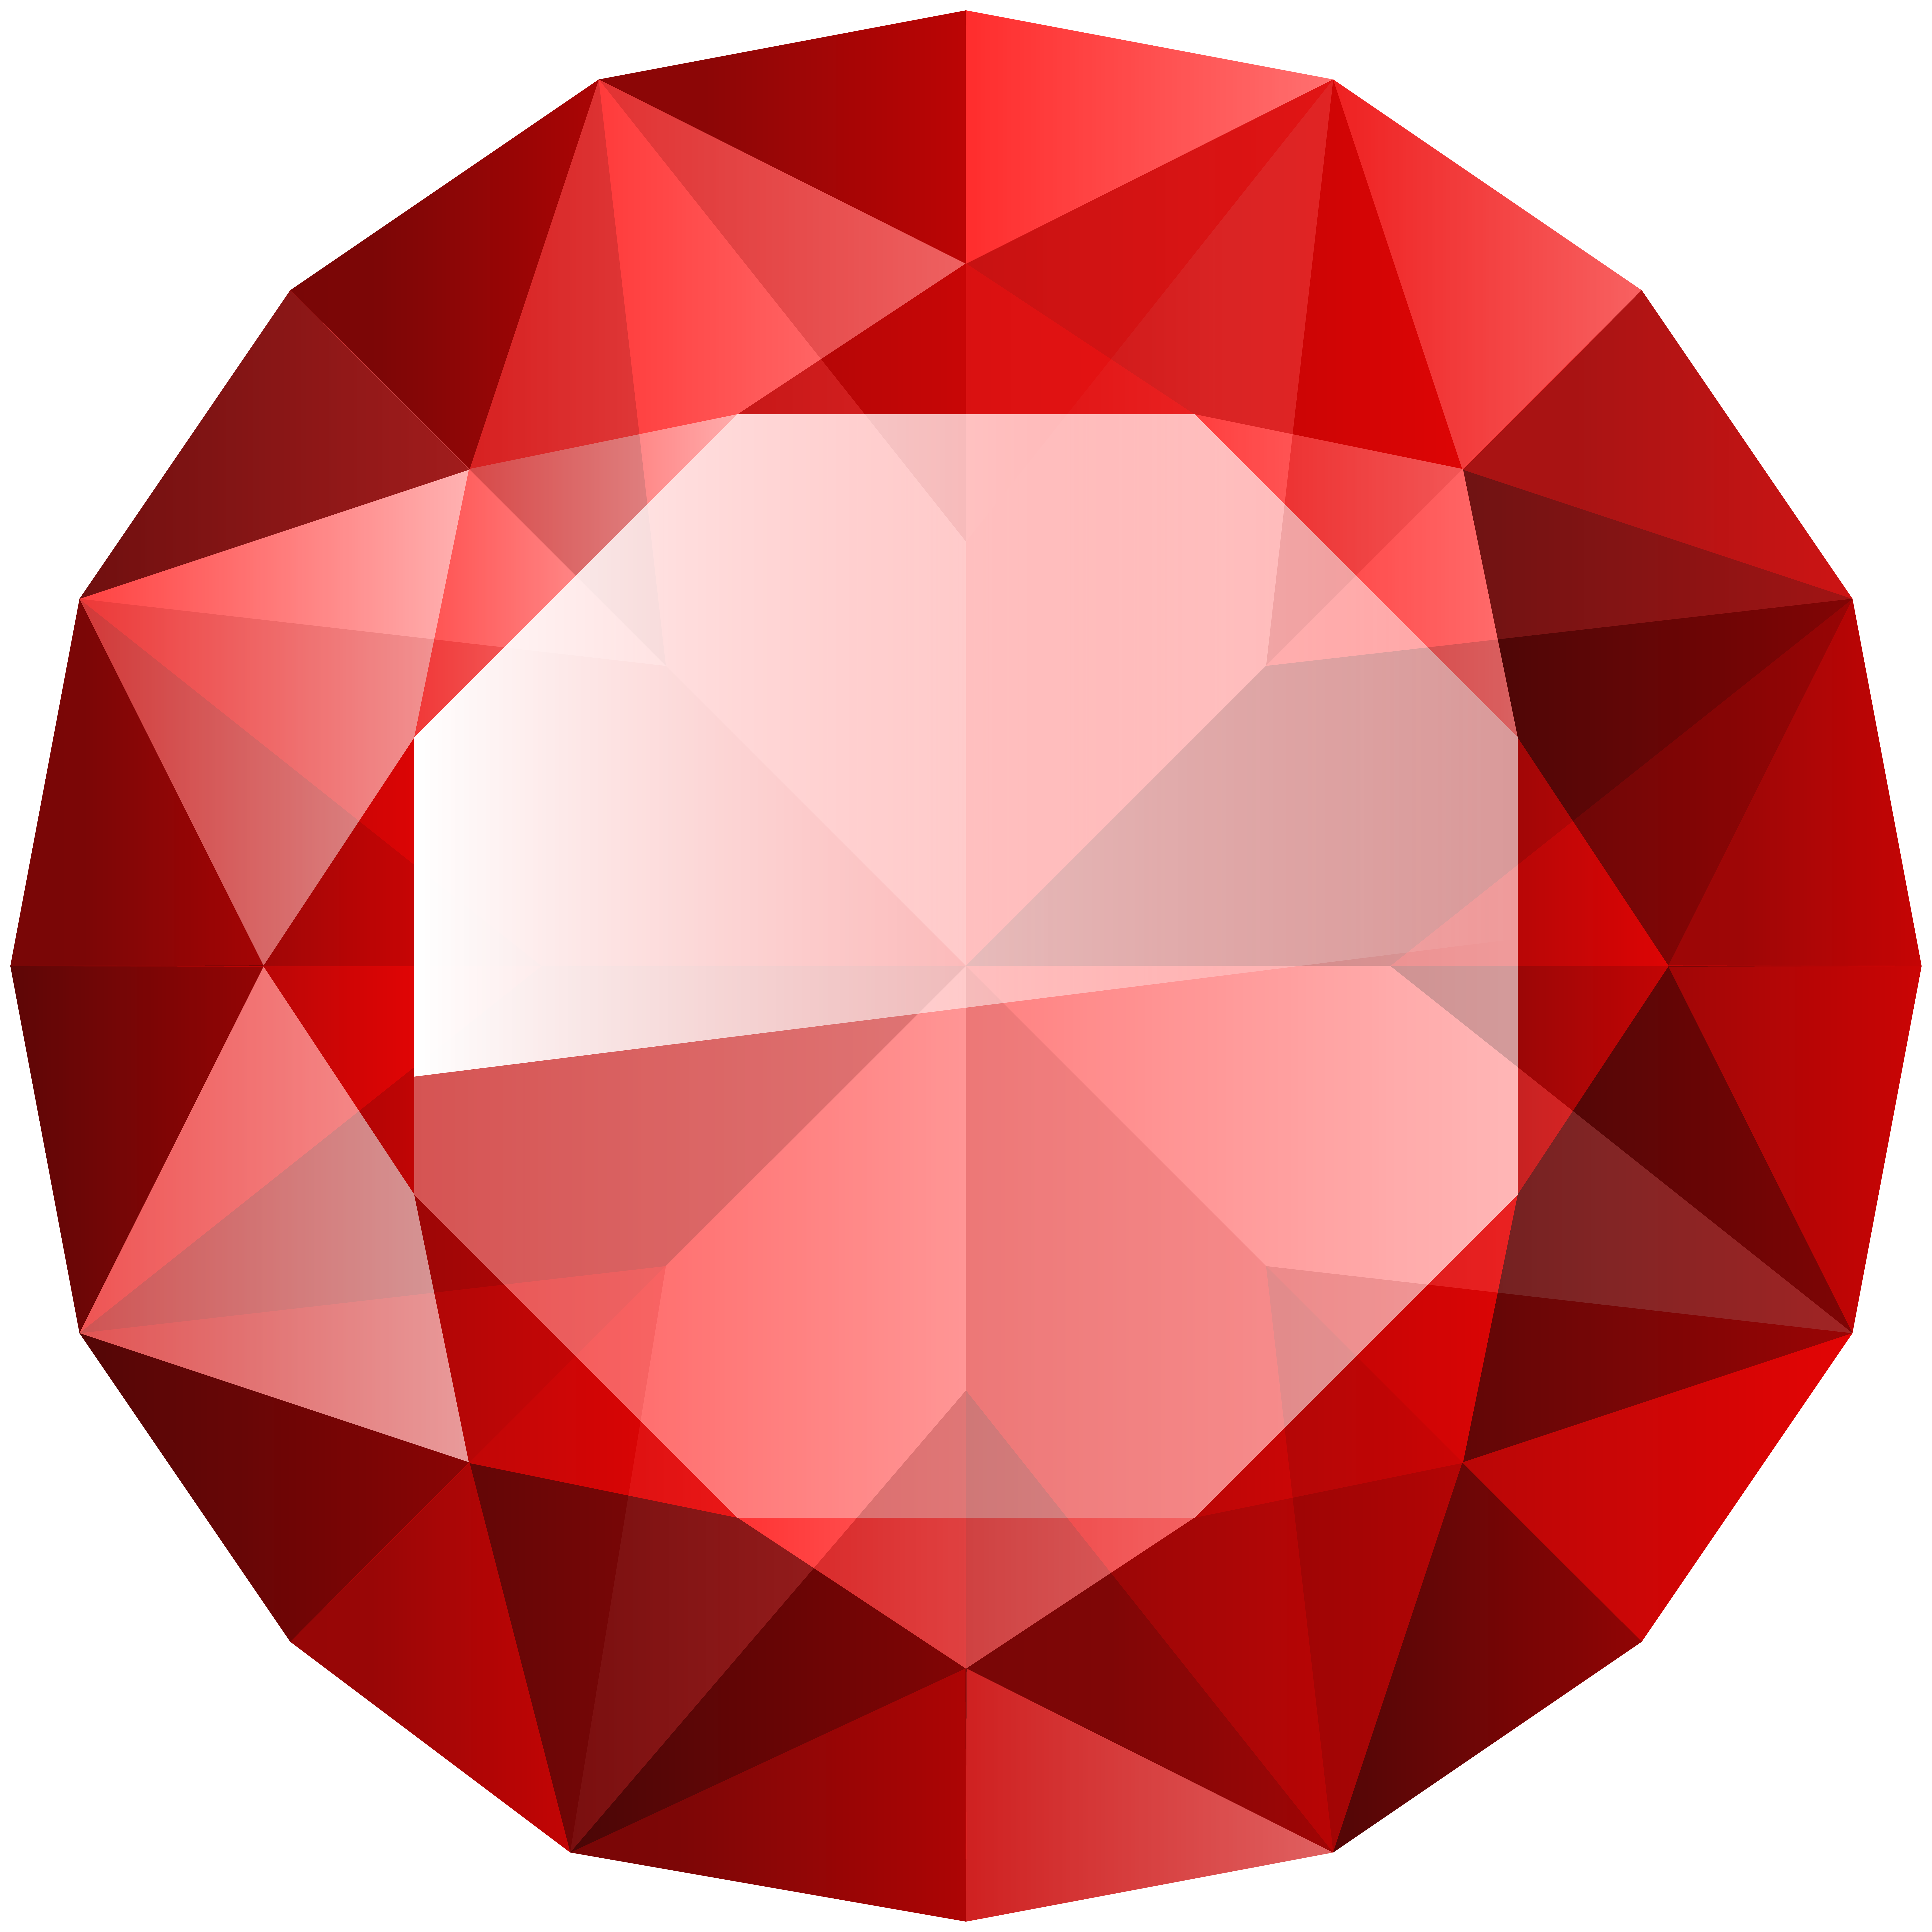 Mickey Diamond Mouse Transparent Red HD Image Free PNG Clipart